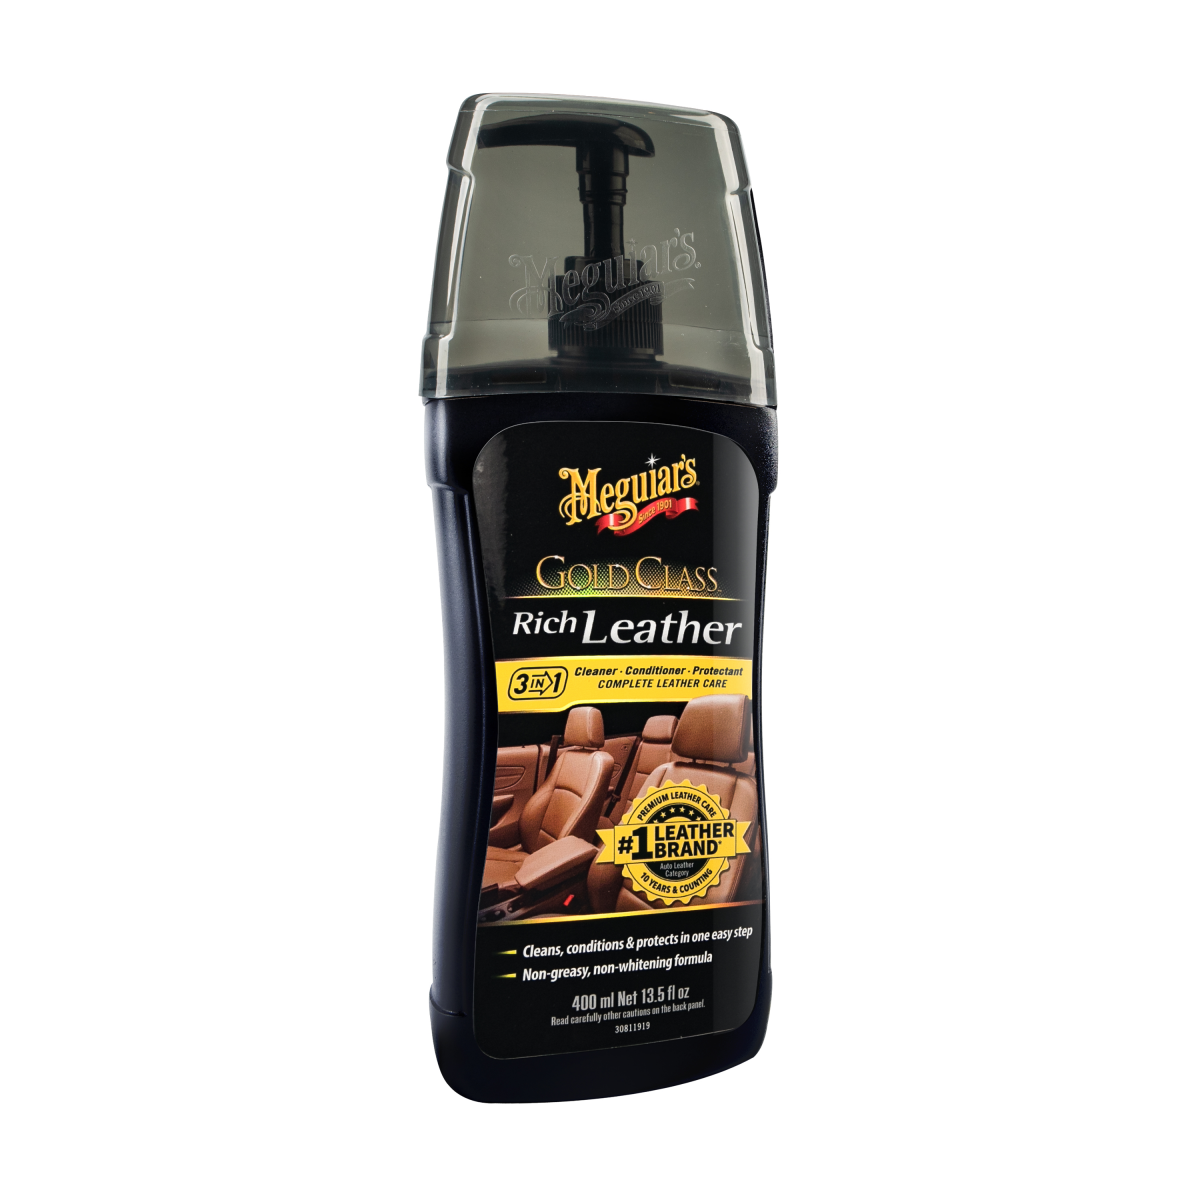  Meguiar's Gold Class Leather Cleaner & Conditioner